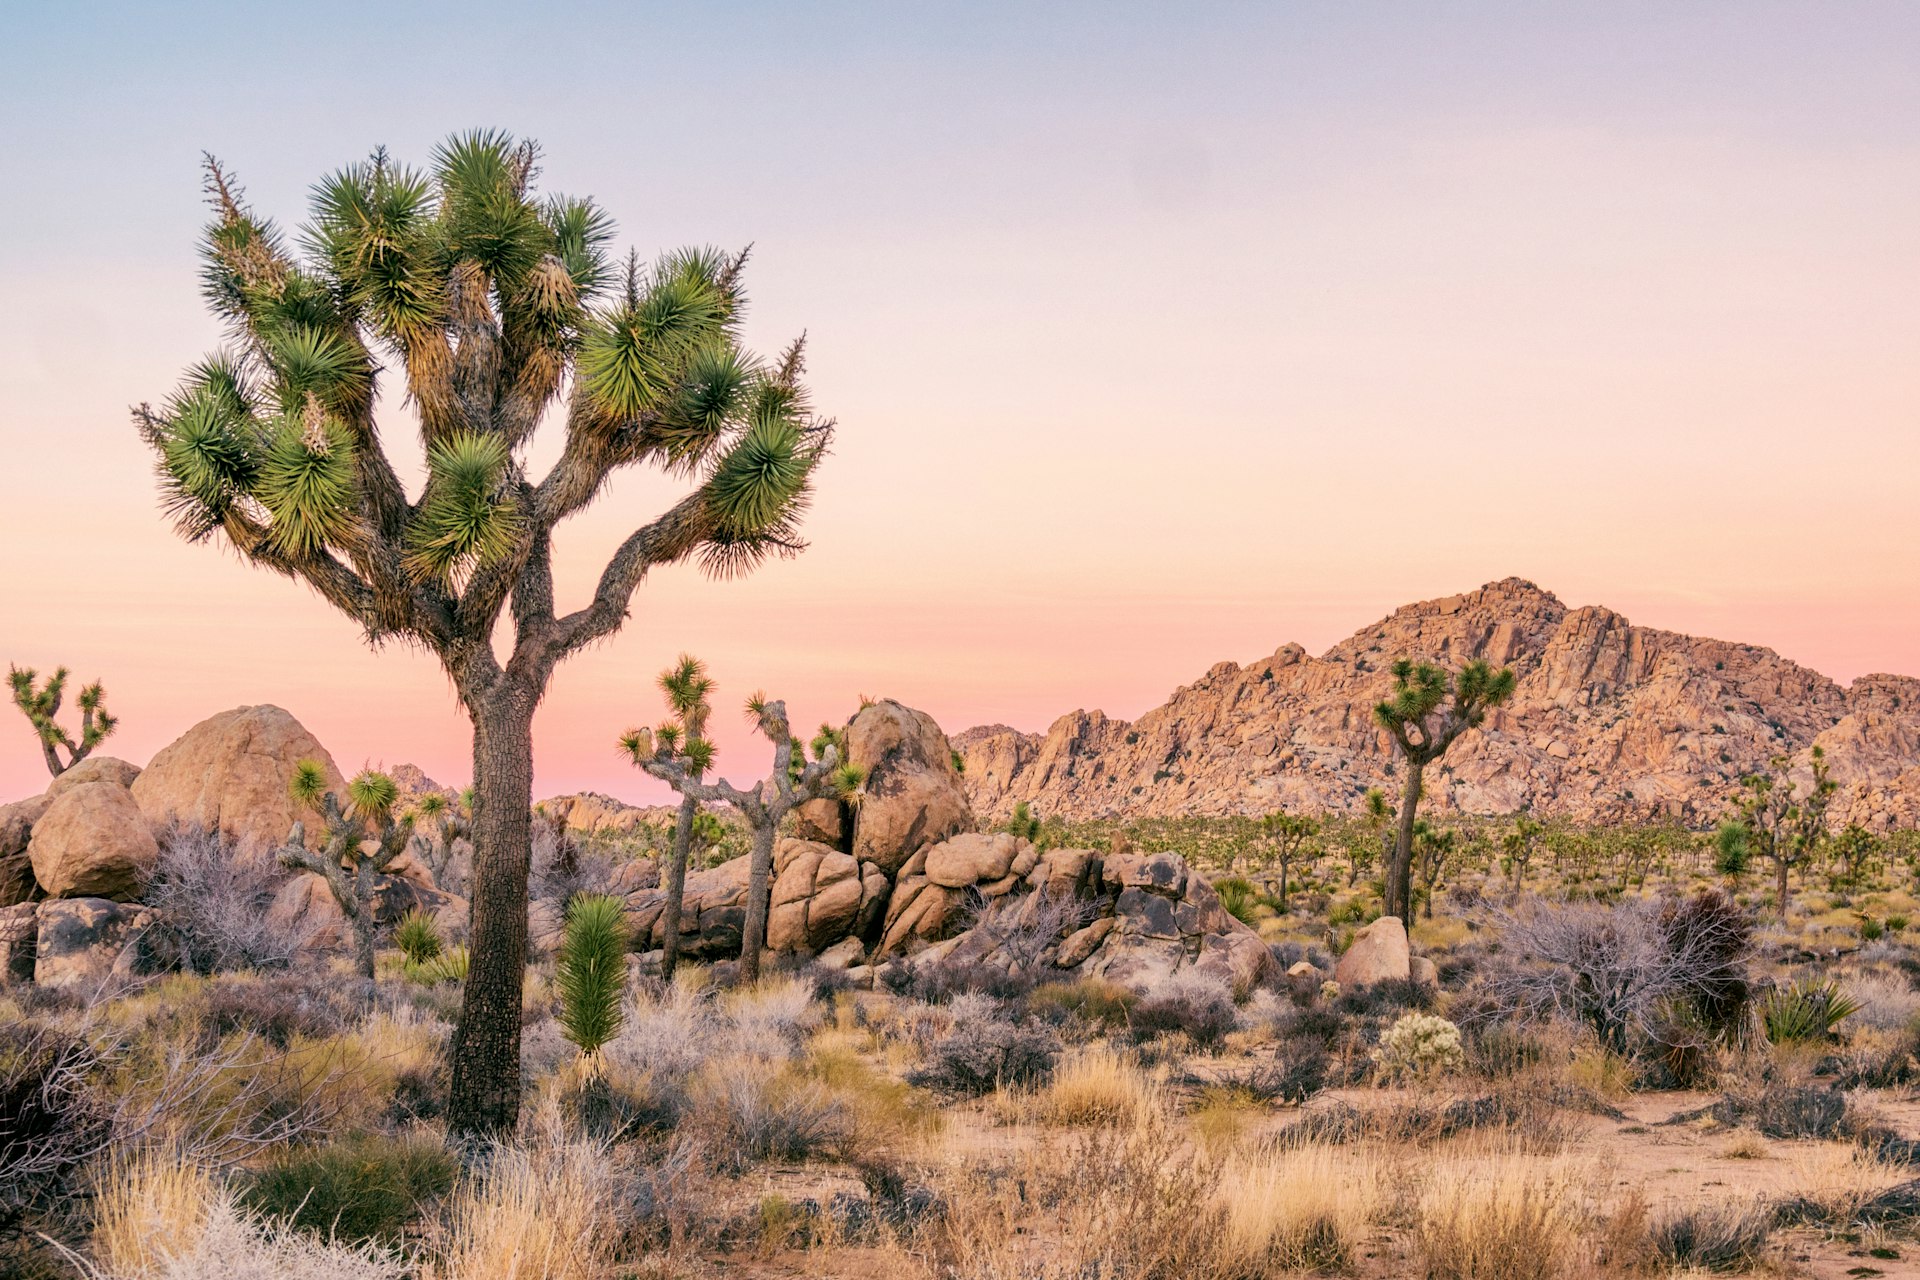 Seussian Joshua trees sprout from the desert of Joshua Tree National Park